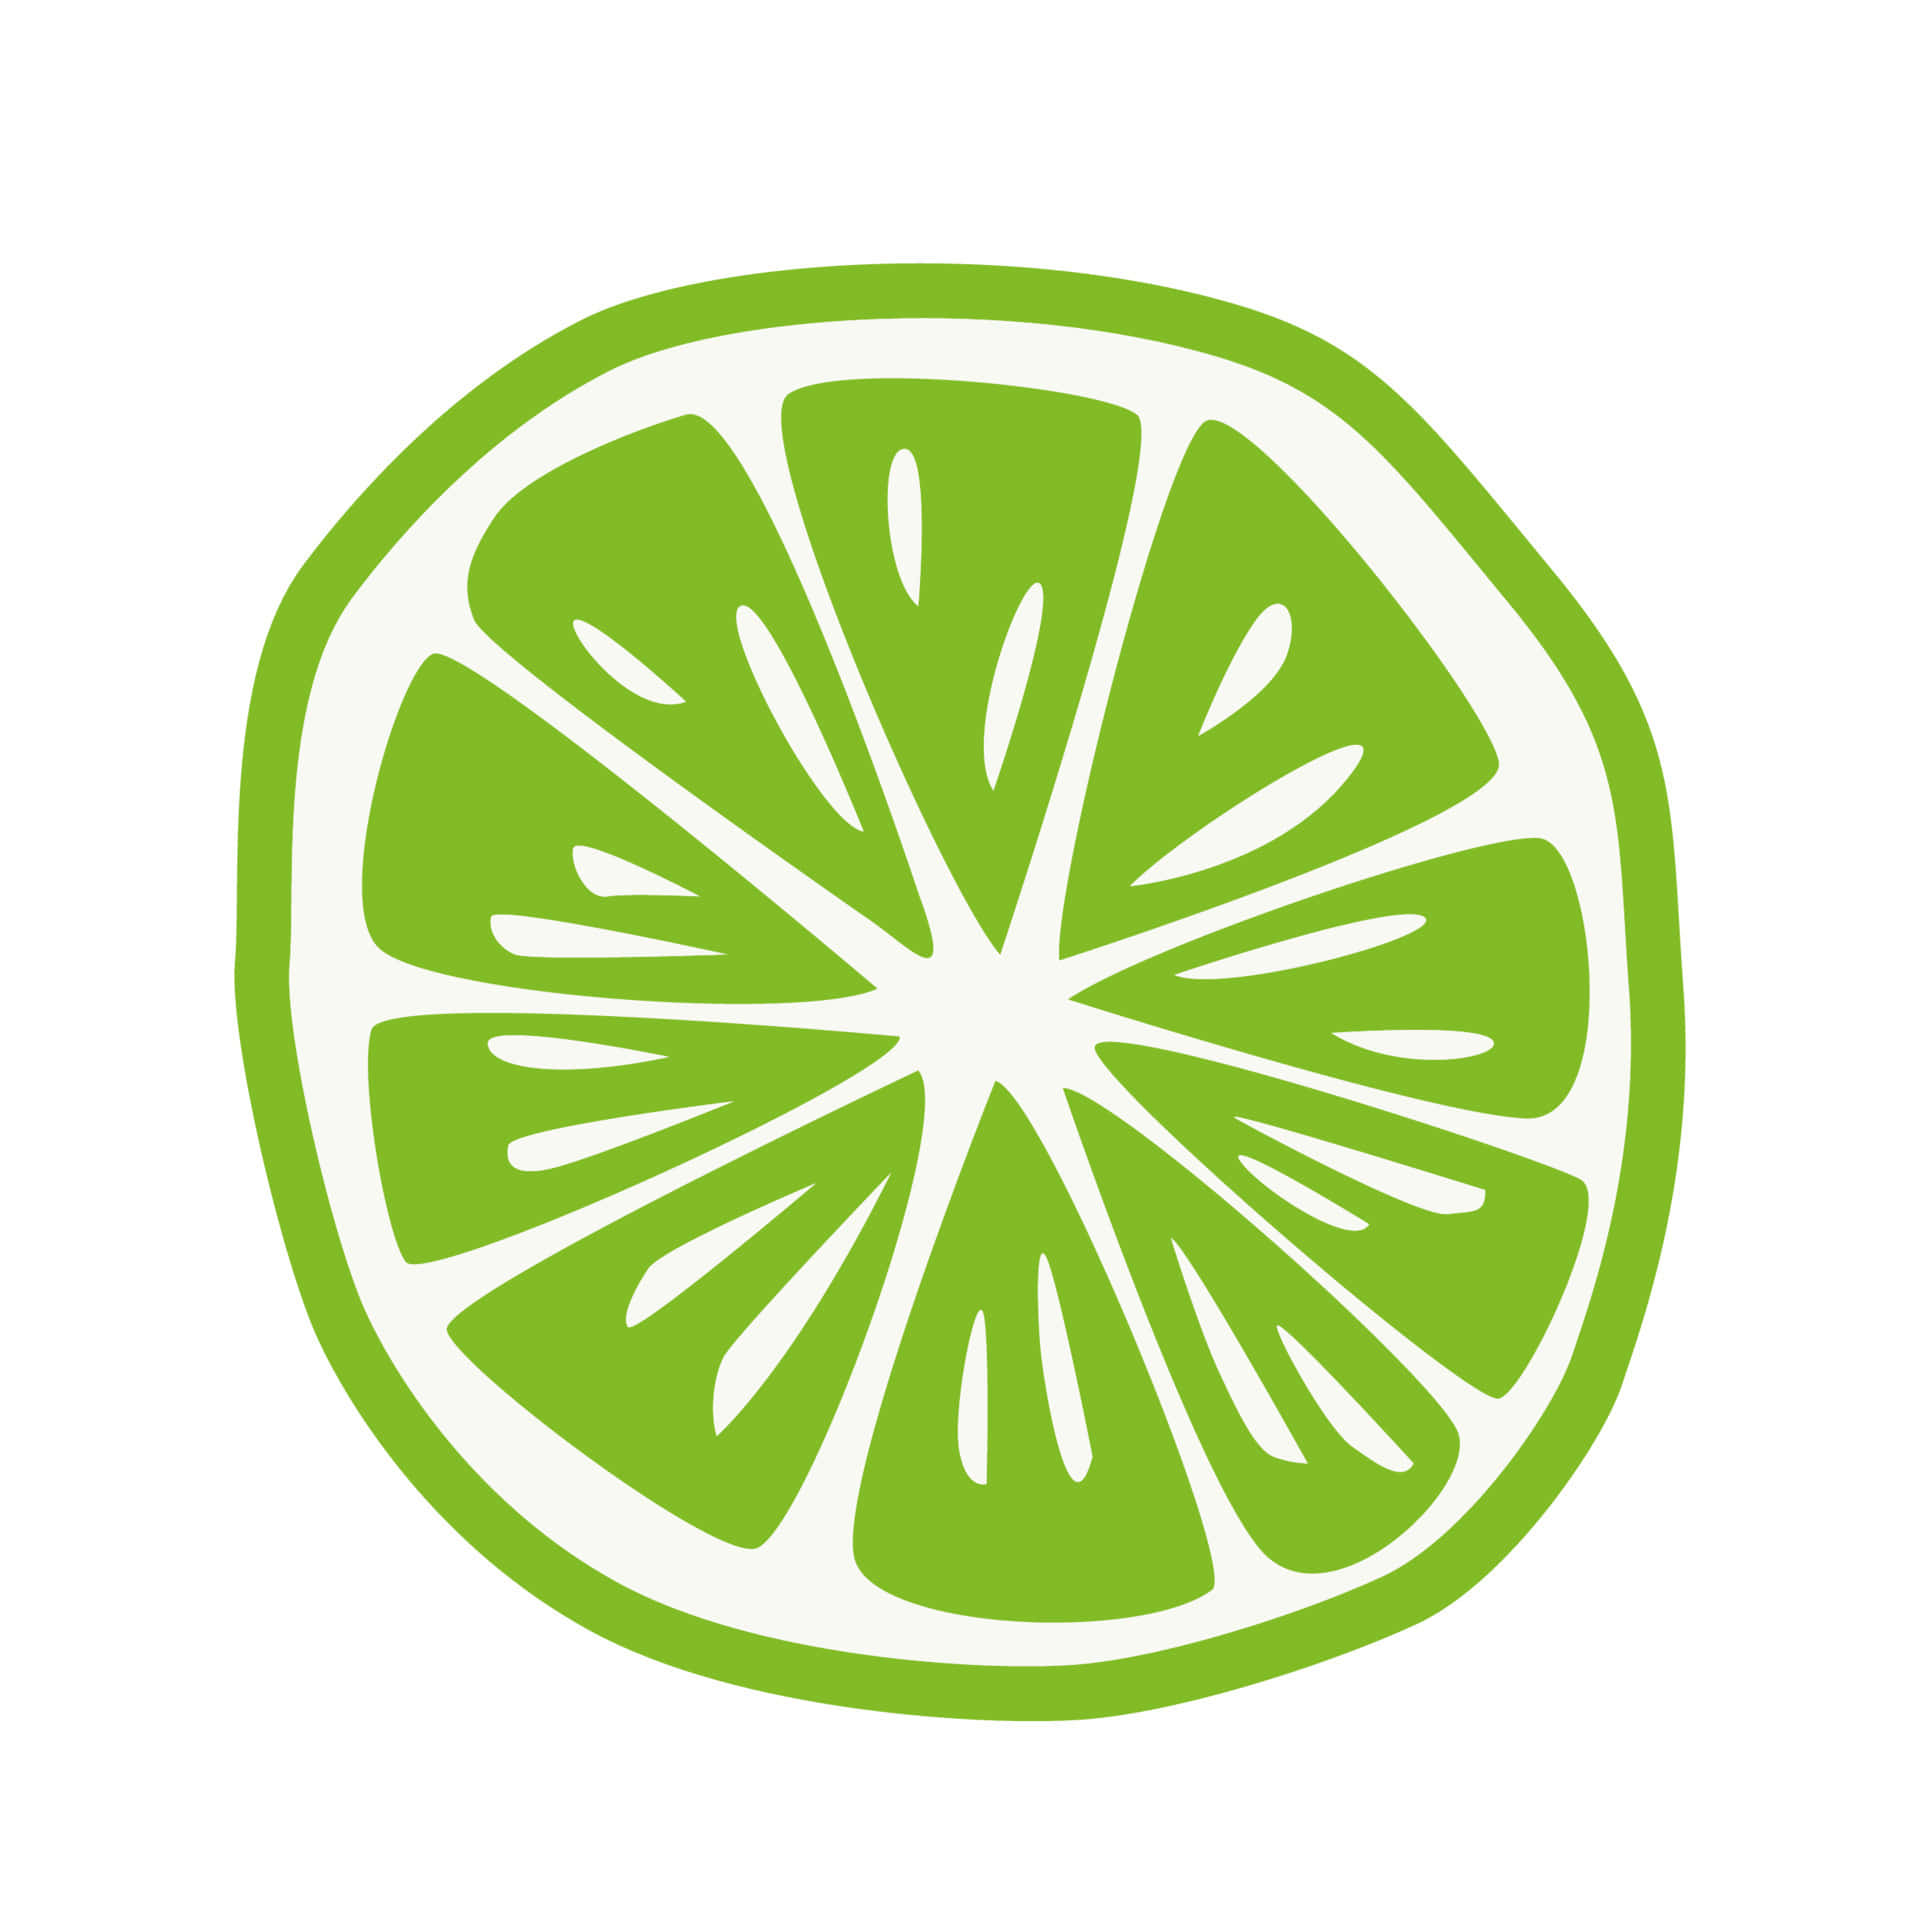 A Lime Slice On A White Background